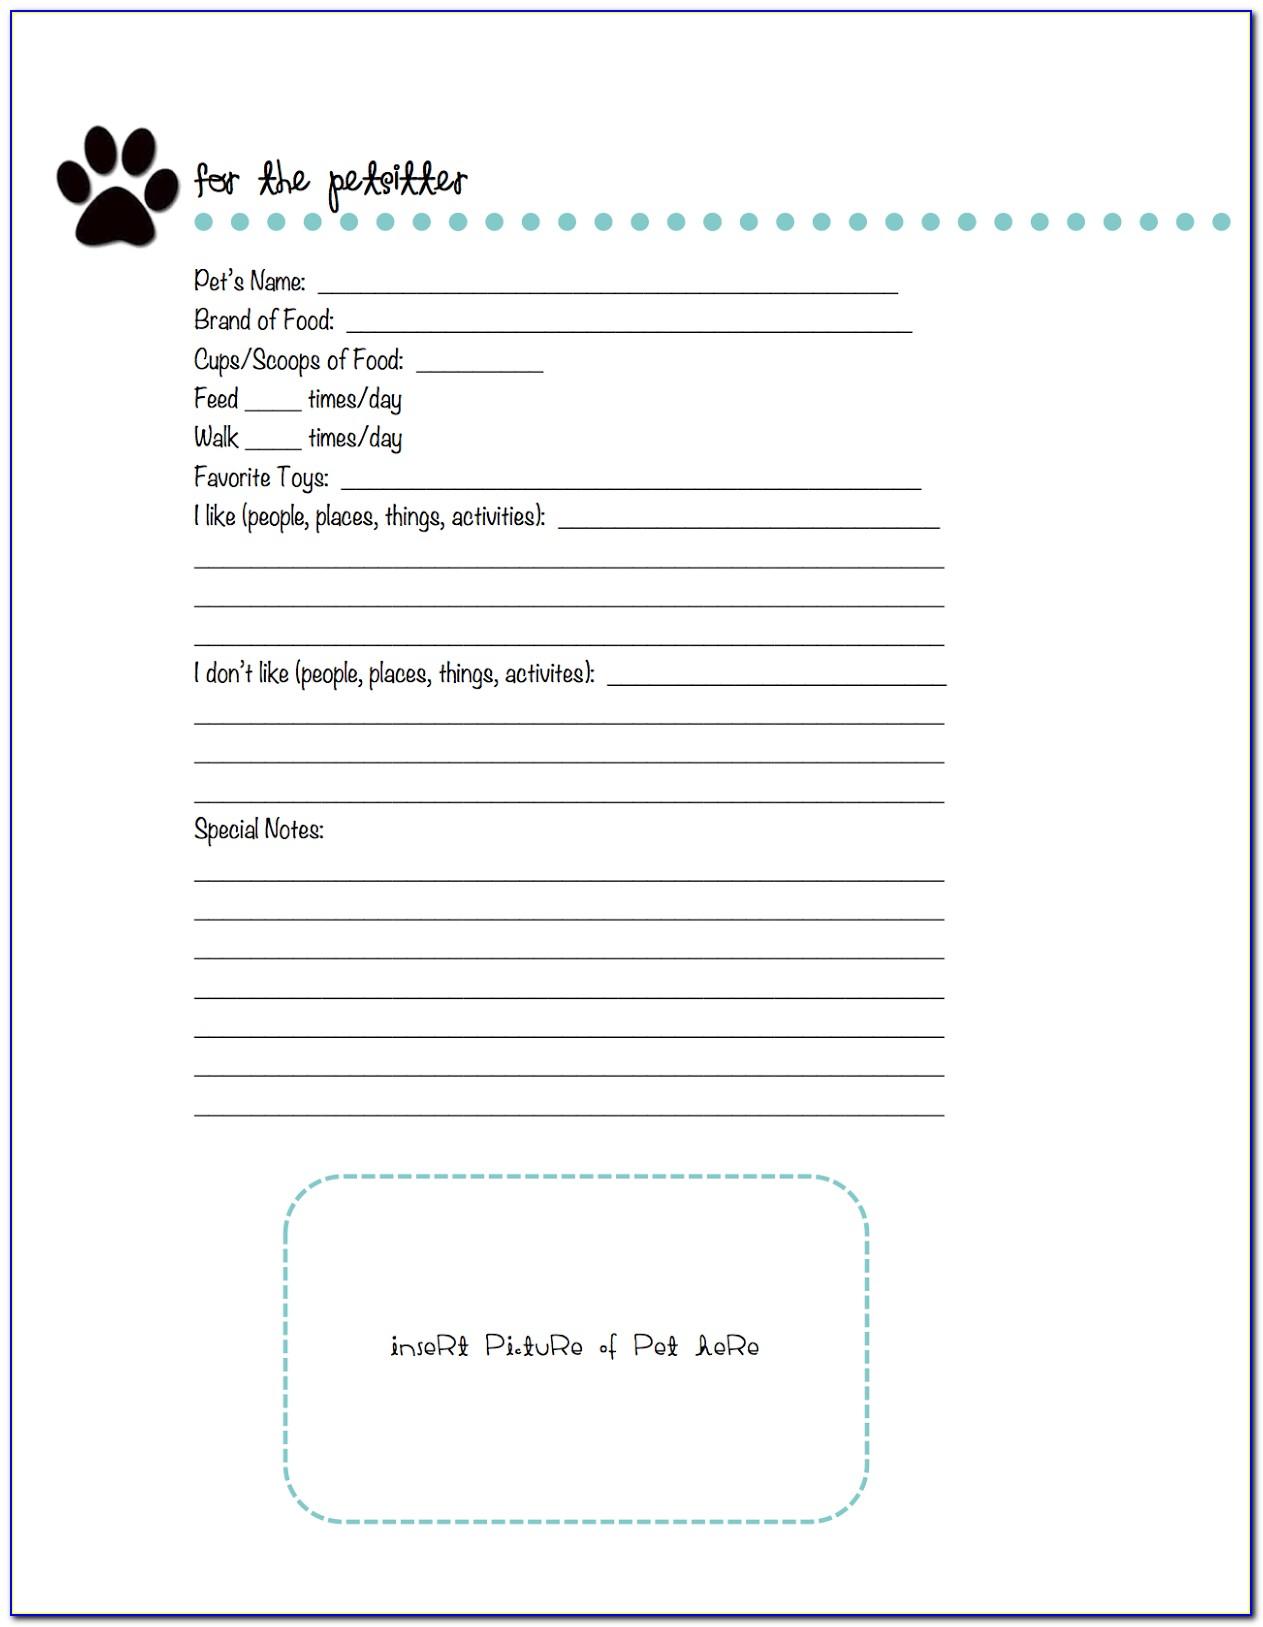 starting-a-pet-sitting-business-forms-form-resume-examples-b8dvvbwdmb